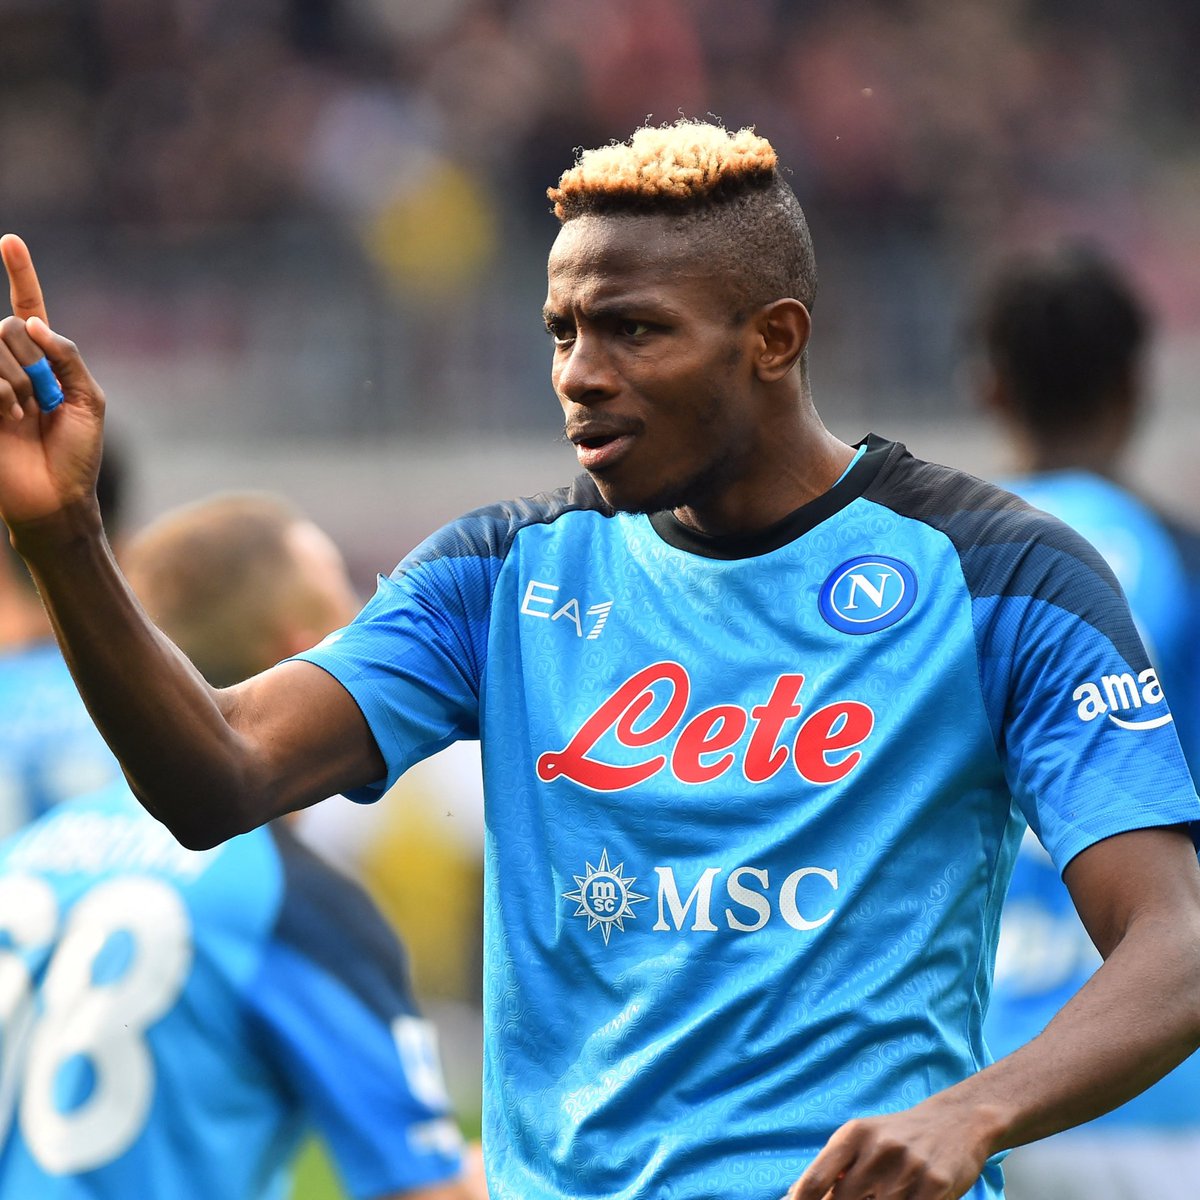 Fabrizio Romano: “Osimhen will complete the season at Napoli and then will leave in the summer - he believes his cycle at Napoli is done. “Chelsea will be in the conversation, keep an eye on #Arsenal too.' #afc